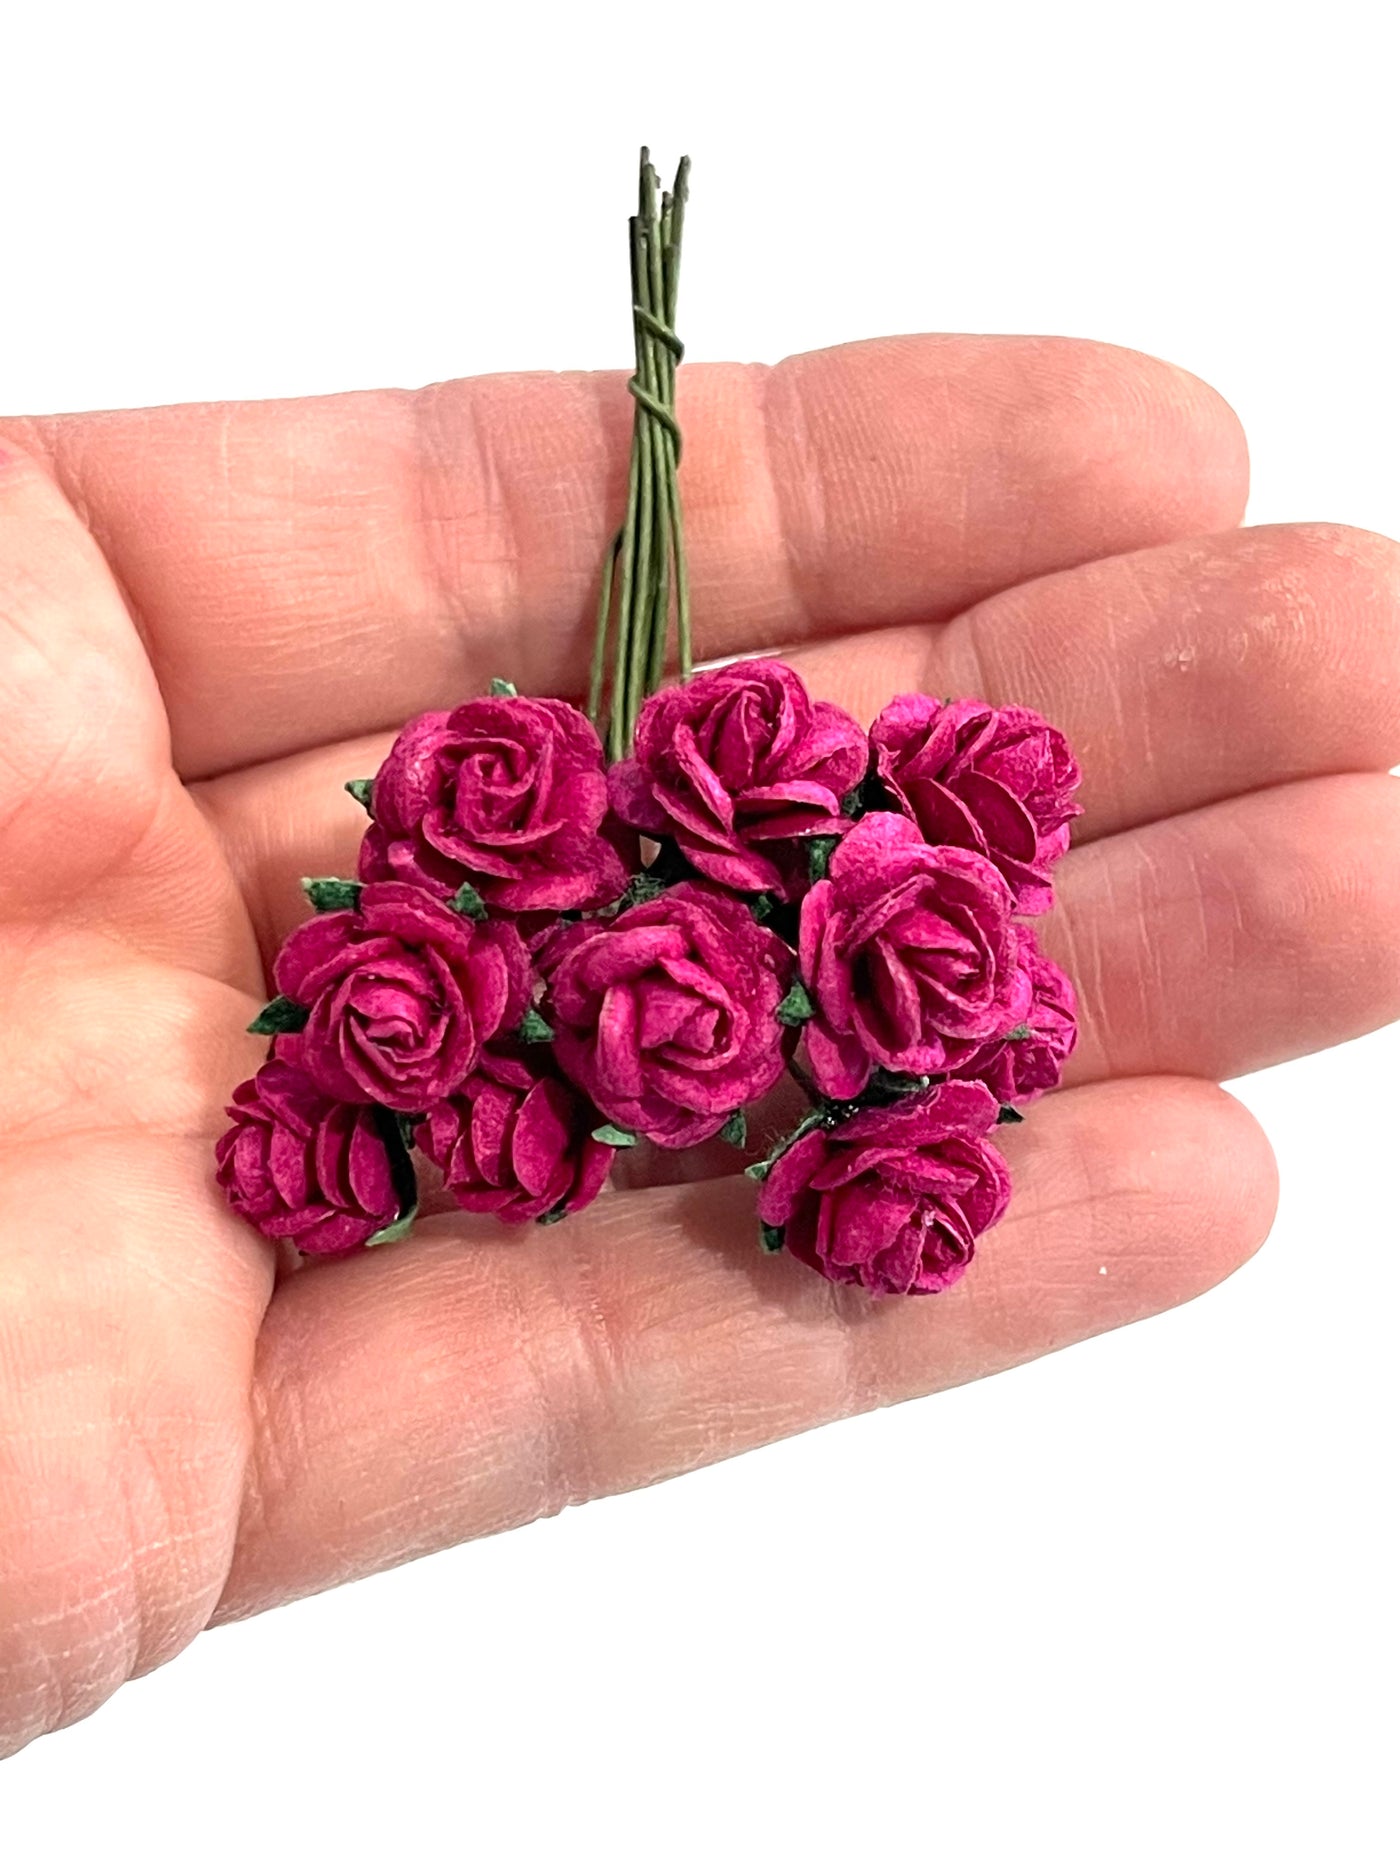 Burgundy Pink Mulberry Paper Roses - 10mm, 15mm, 20mm